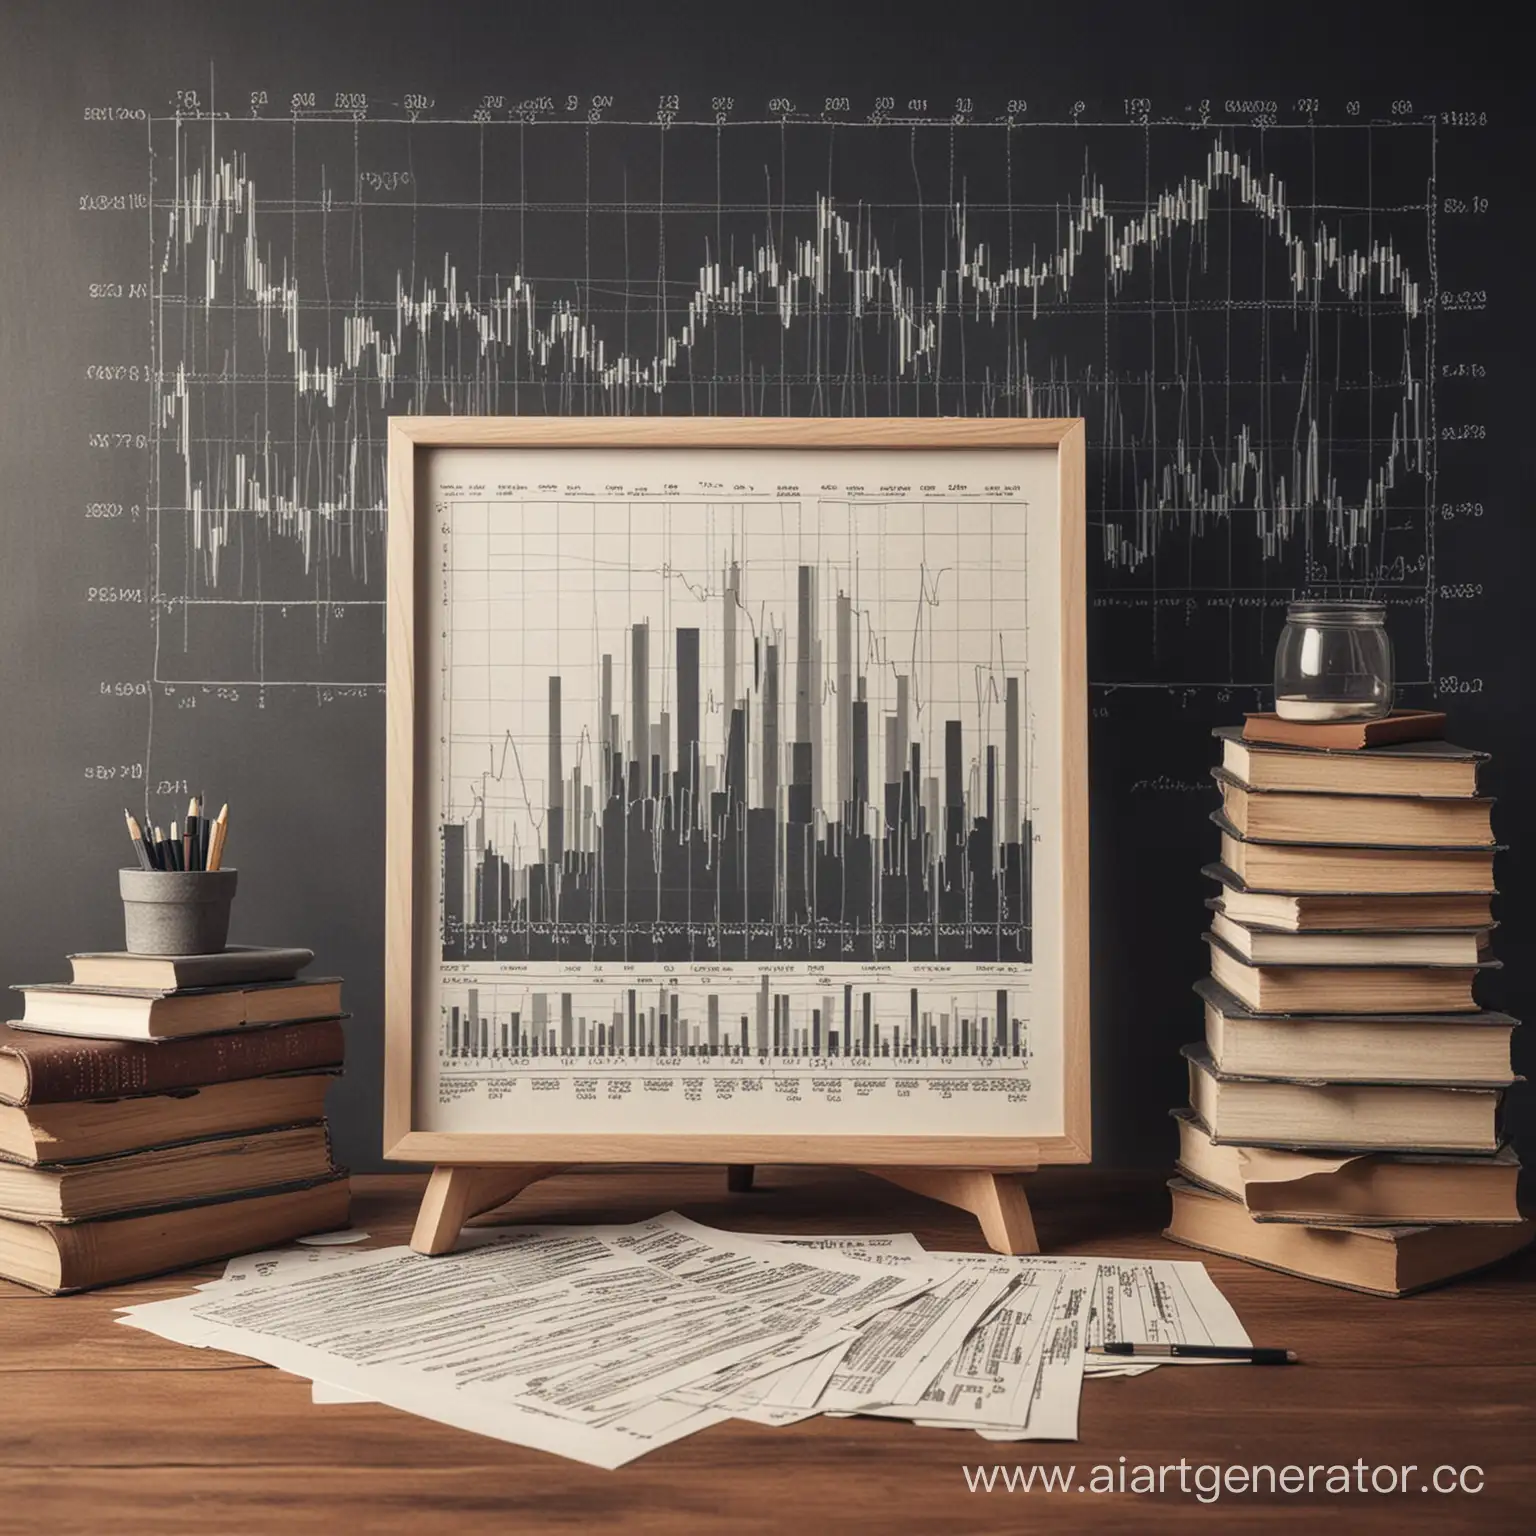 Stock-Charts-and-Books-Financial-Education-Concept